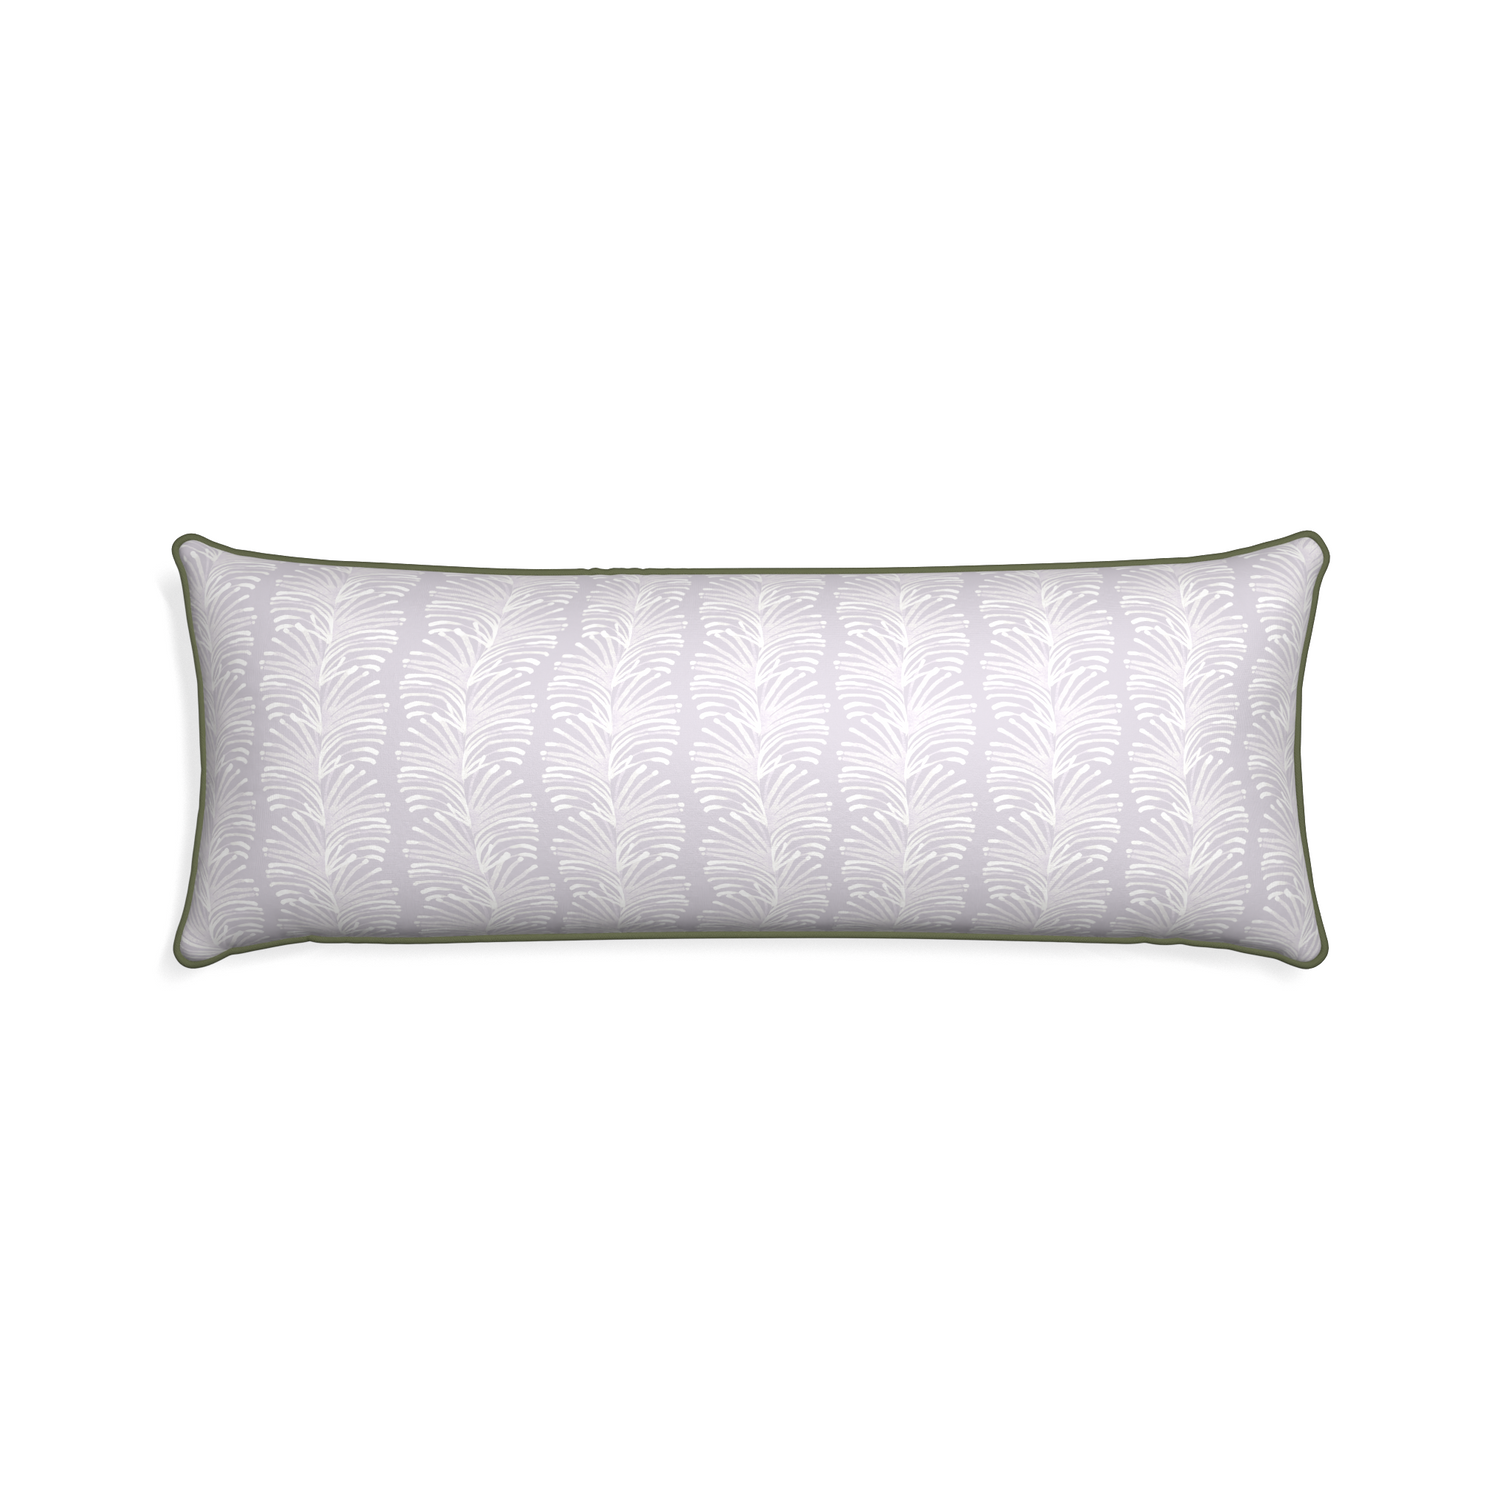 Xl-lumbar emma lavender custom pillow with f piping on white background